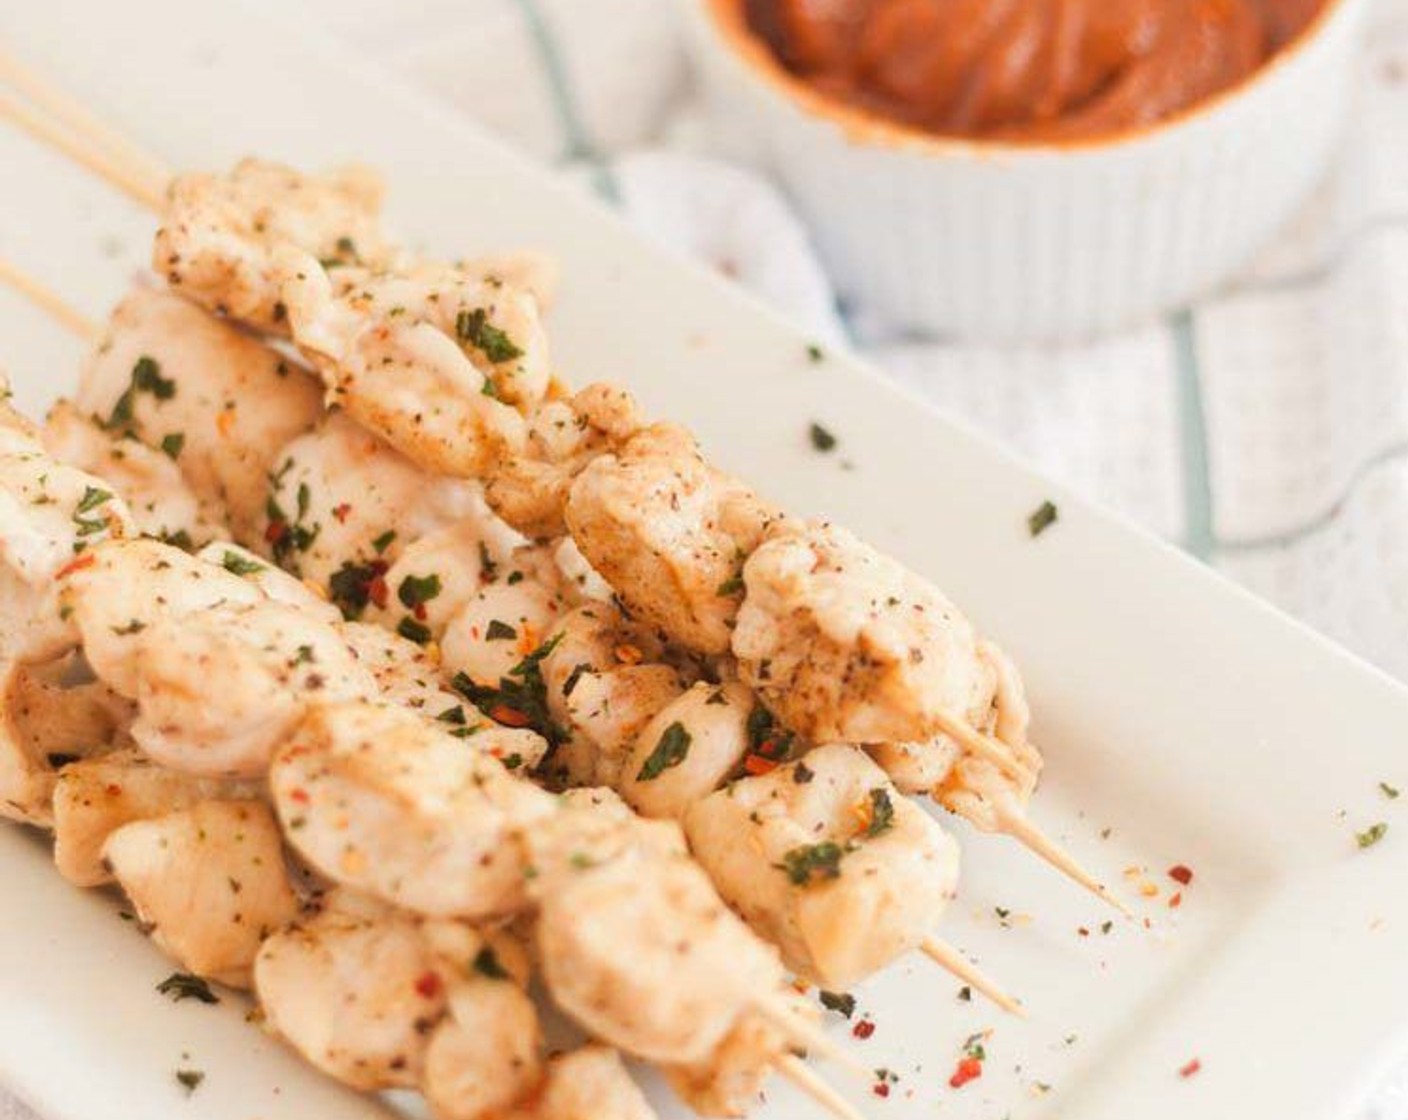 Microwave Chicken Skewers with Peanut Sauce